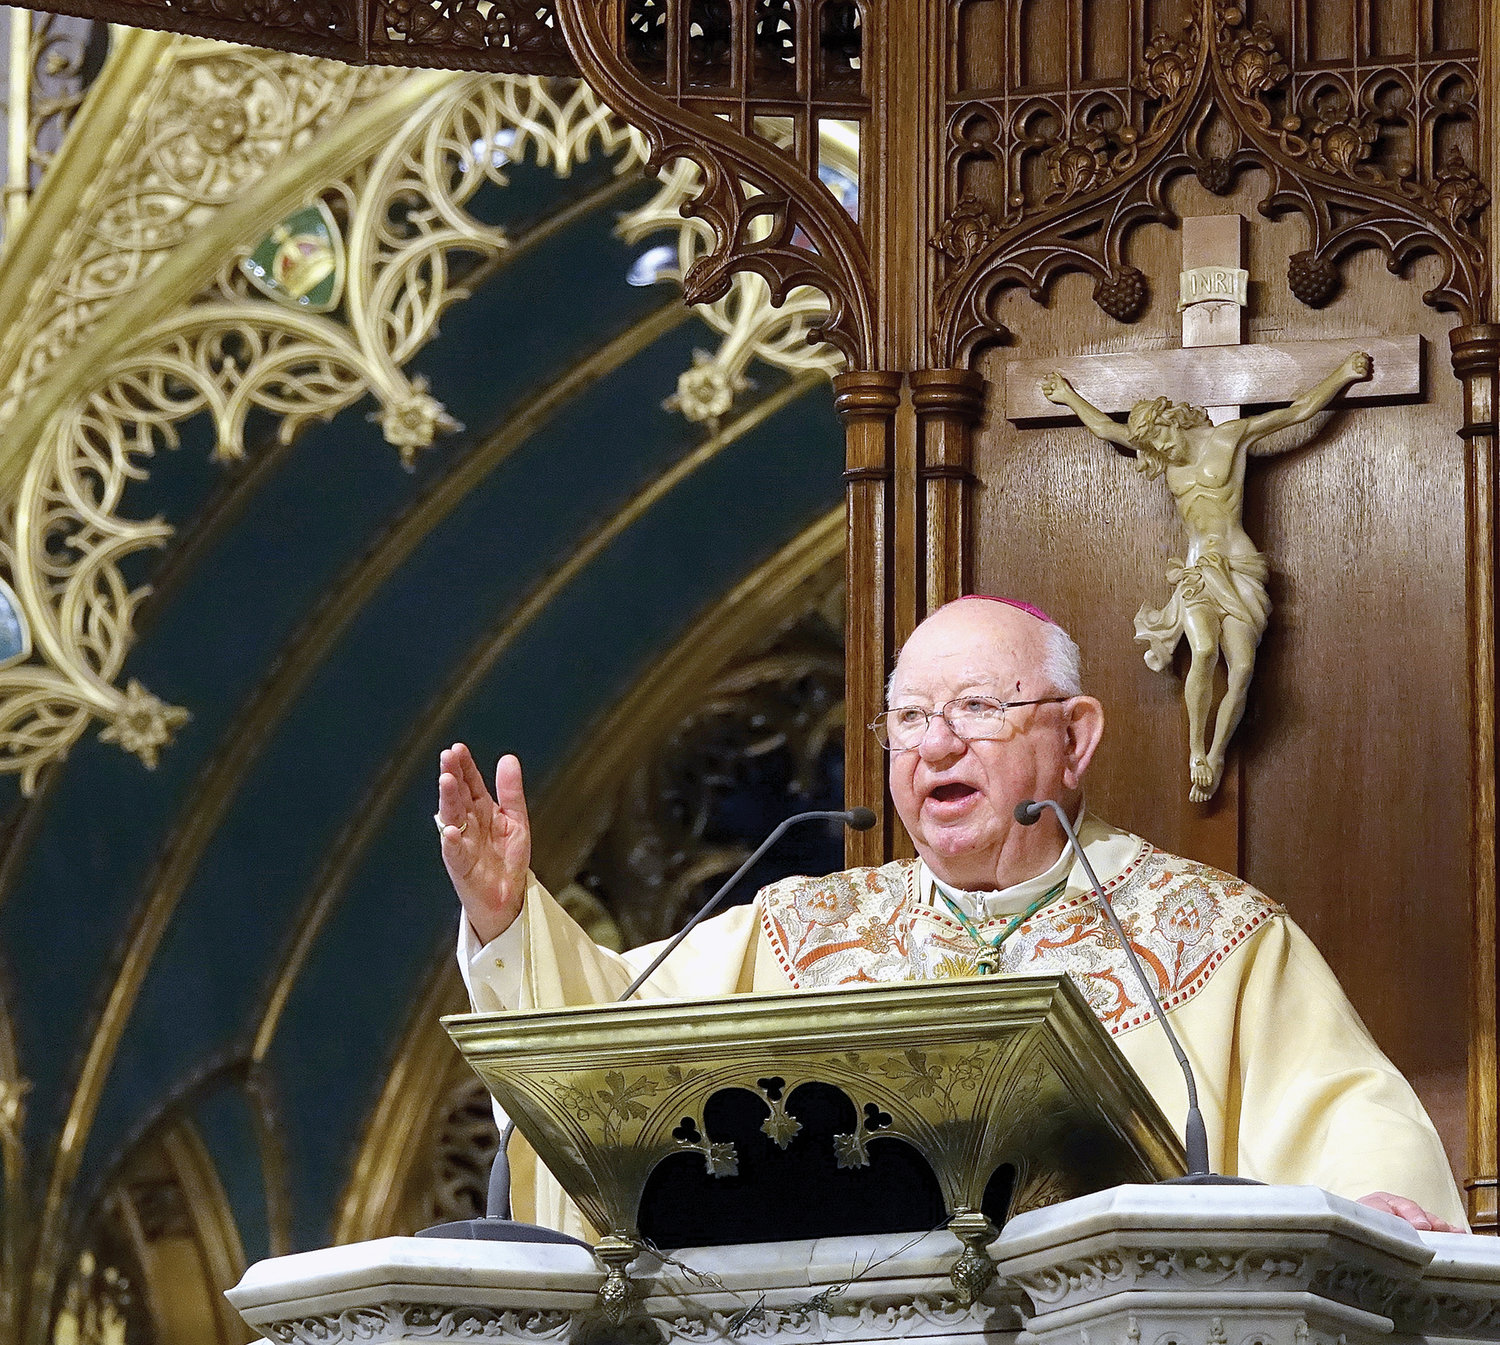 Bishop Emeritus William Murphy of Rockville Centre preaches during the St. Patrick’s Day Mass at St. Patrick’s Cathedral March 17. In an early 20th anniversary tribute to those who were killed during the 9/11 attacks, the bishop remarked that his Long Island diocese lost 400 parishioners that day.